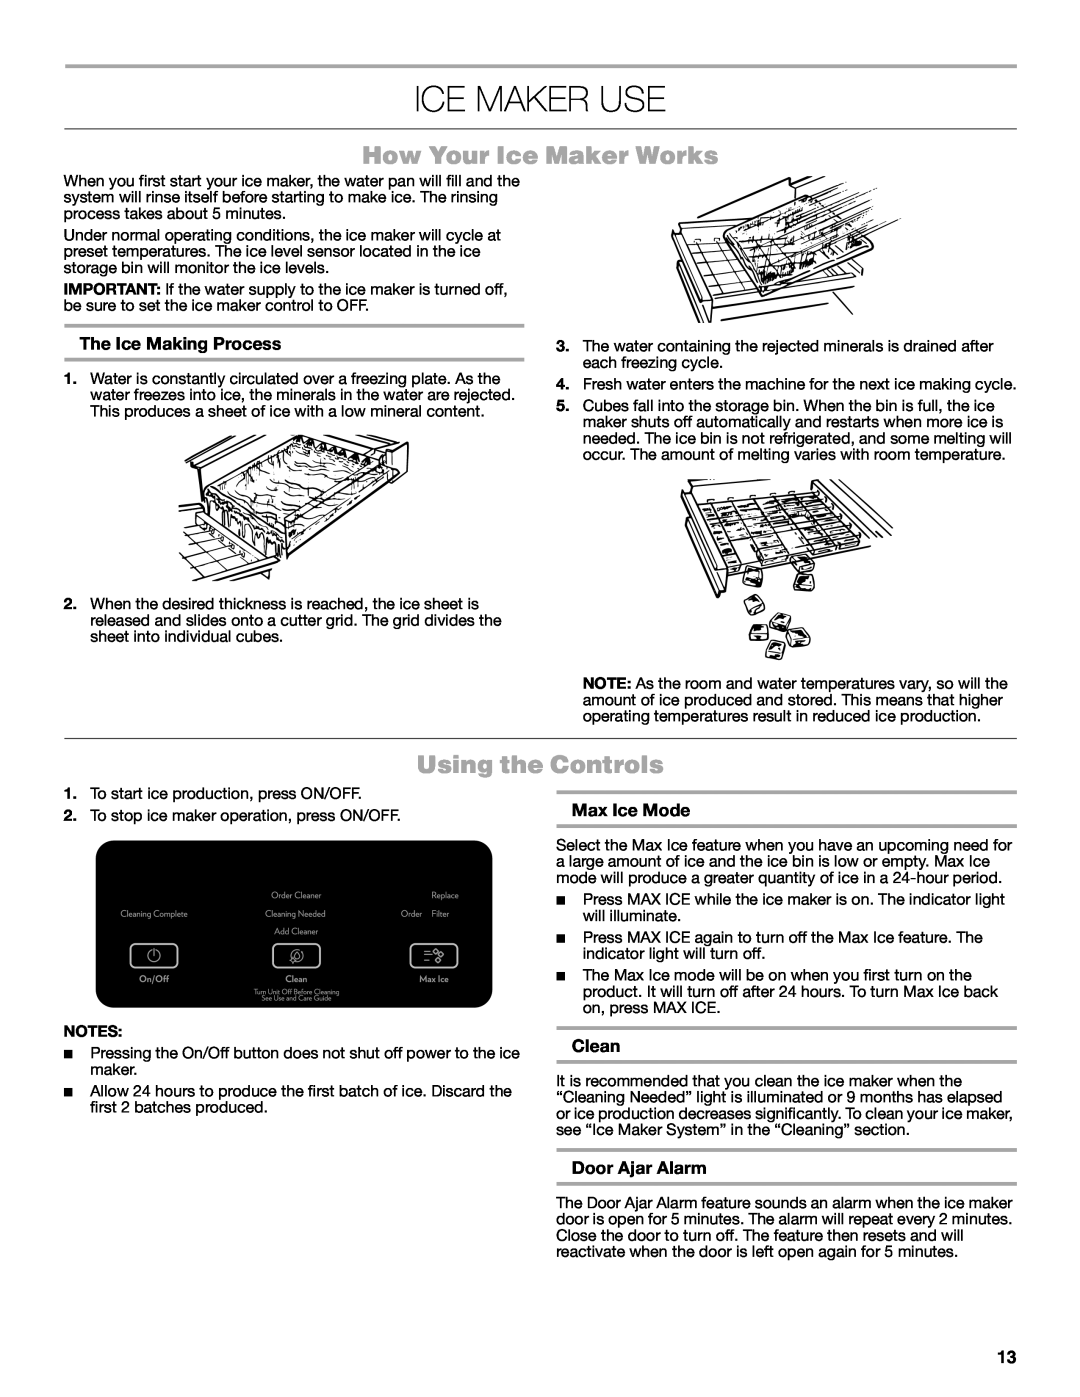 Jenn-Air W10519943B Ice Maker Use, How Your Ice Maker Works, Using the Controls, The Ice Making Process, Max Ice Mode 